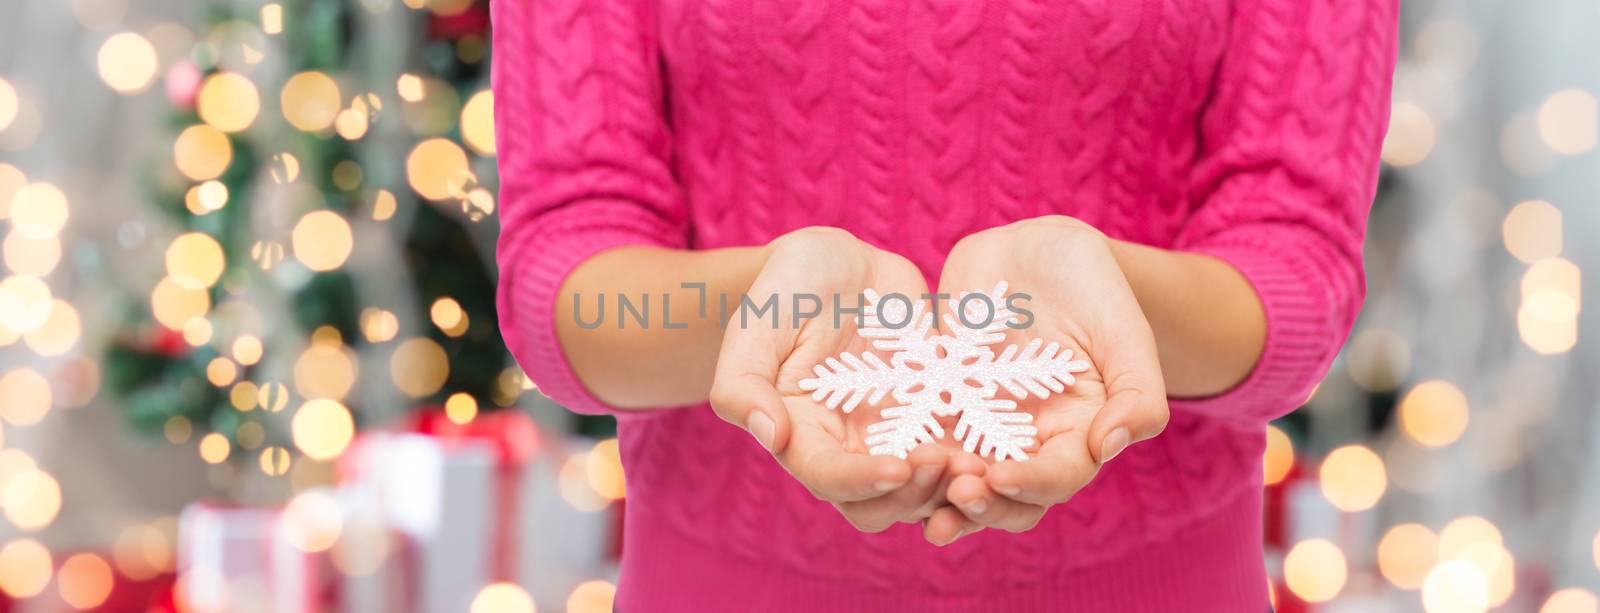 christmas, holidays and people concept - close up of woman in pink sweater holding snowflake over tree lights background